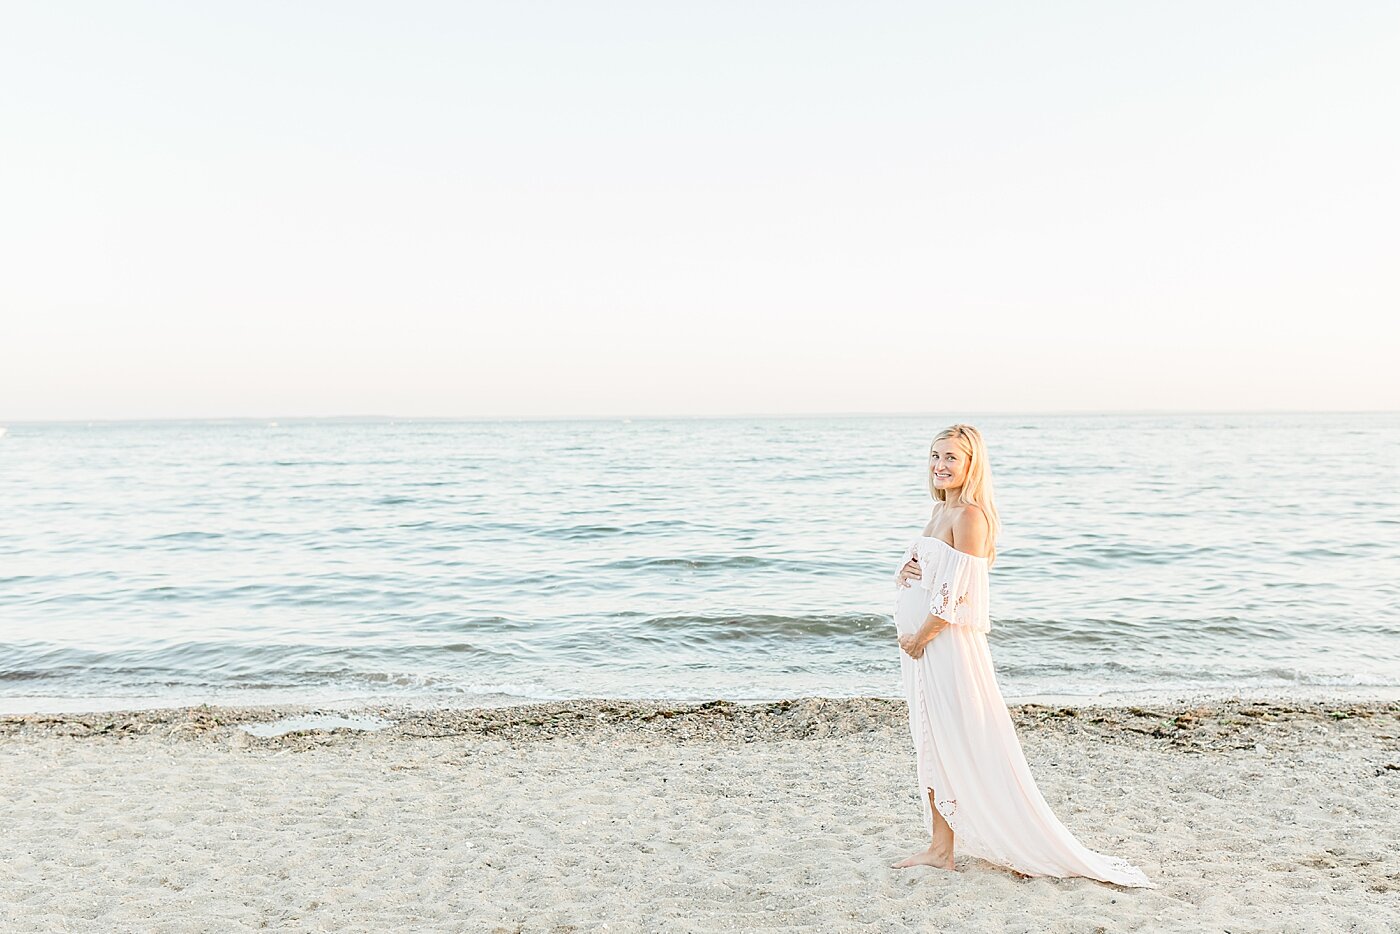 Weed-Beach-Maternity-Session-Kristin-Wood-Photography-10.jpg